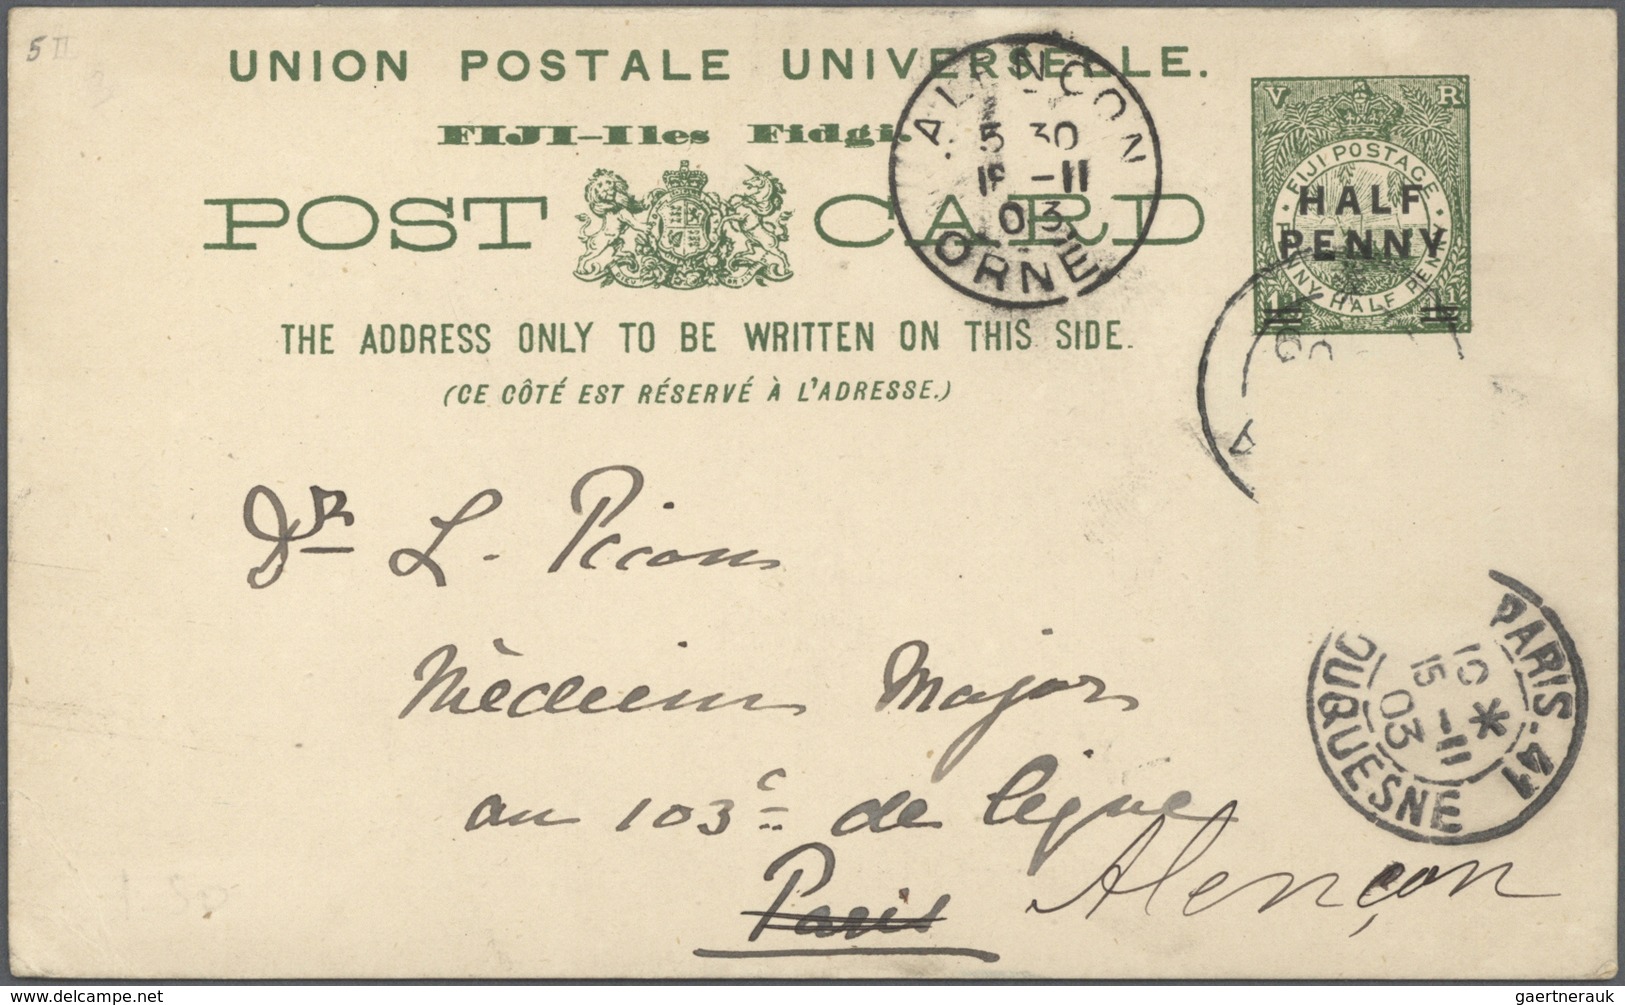 GA Fiji-Inseln: 1897/1928, seven different stat. postcards incl. two uprated prov. surcharged issues (o